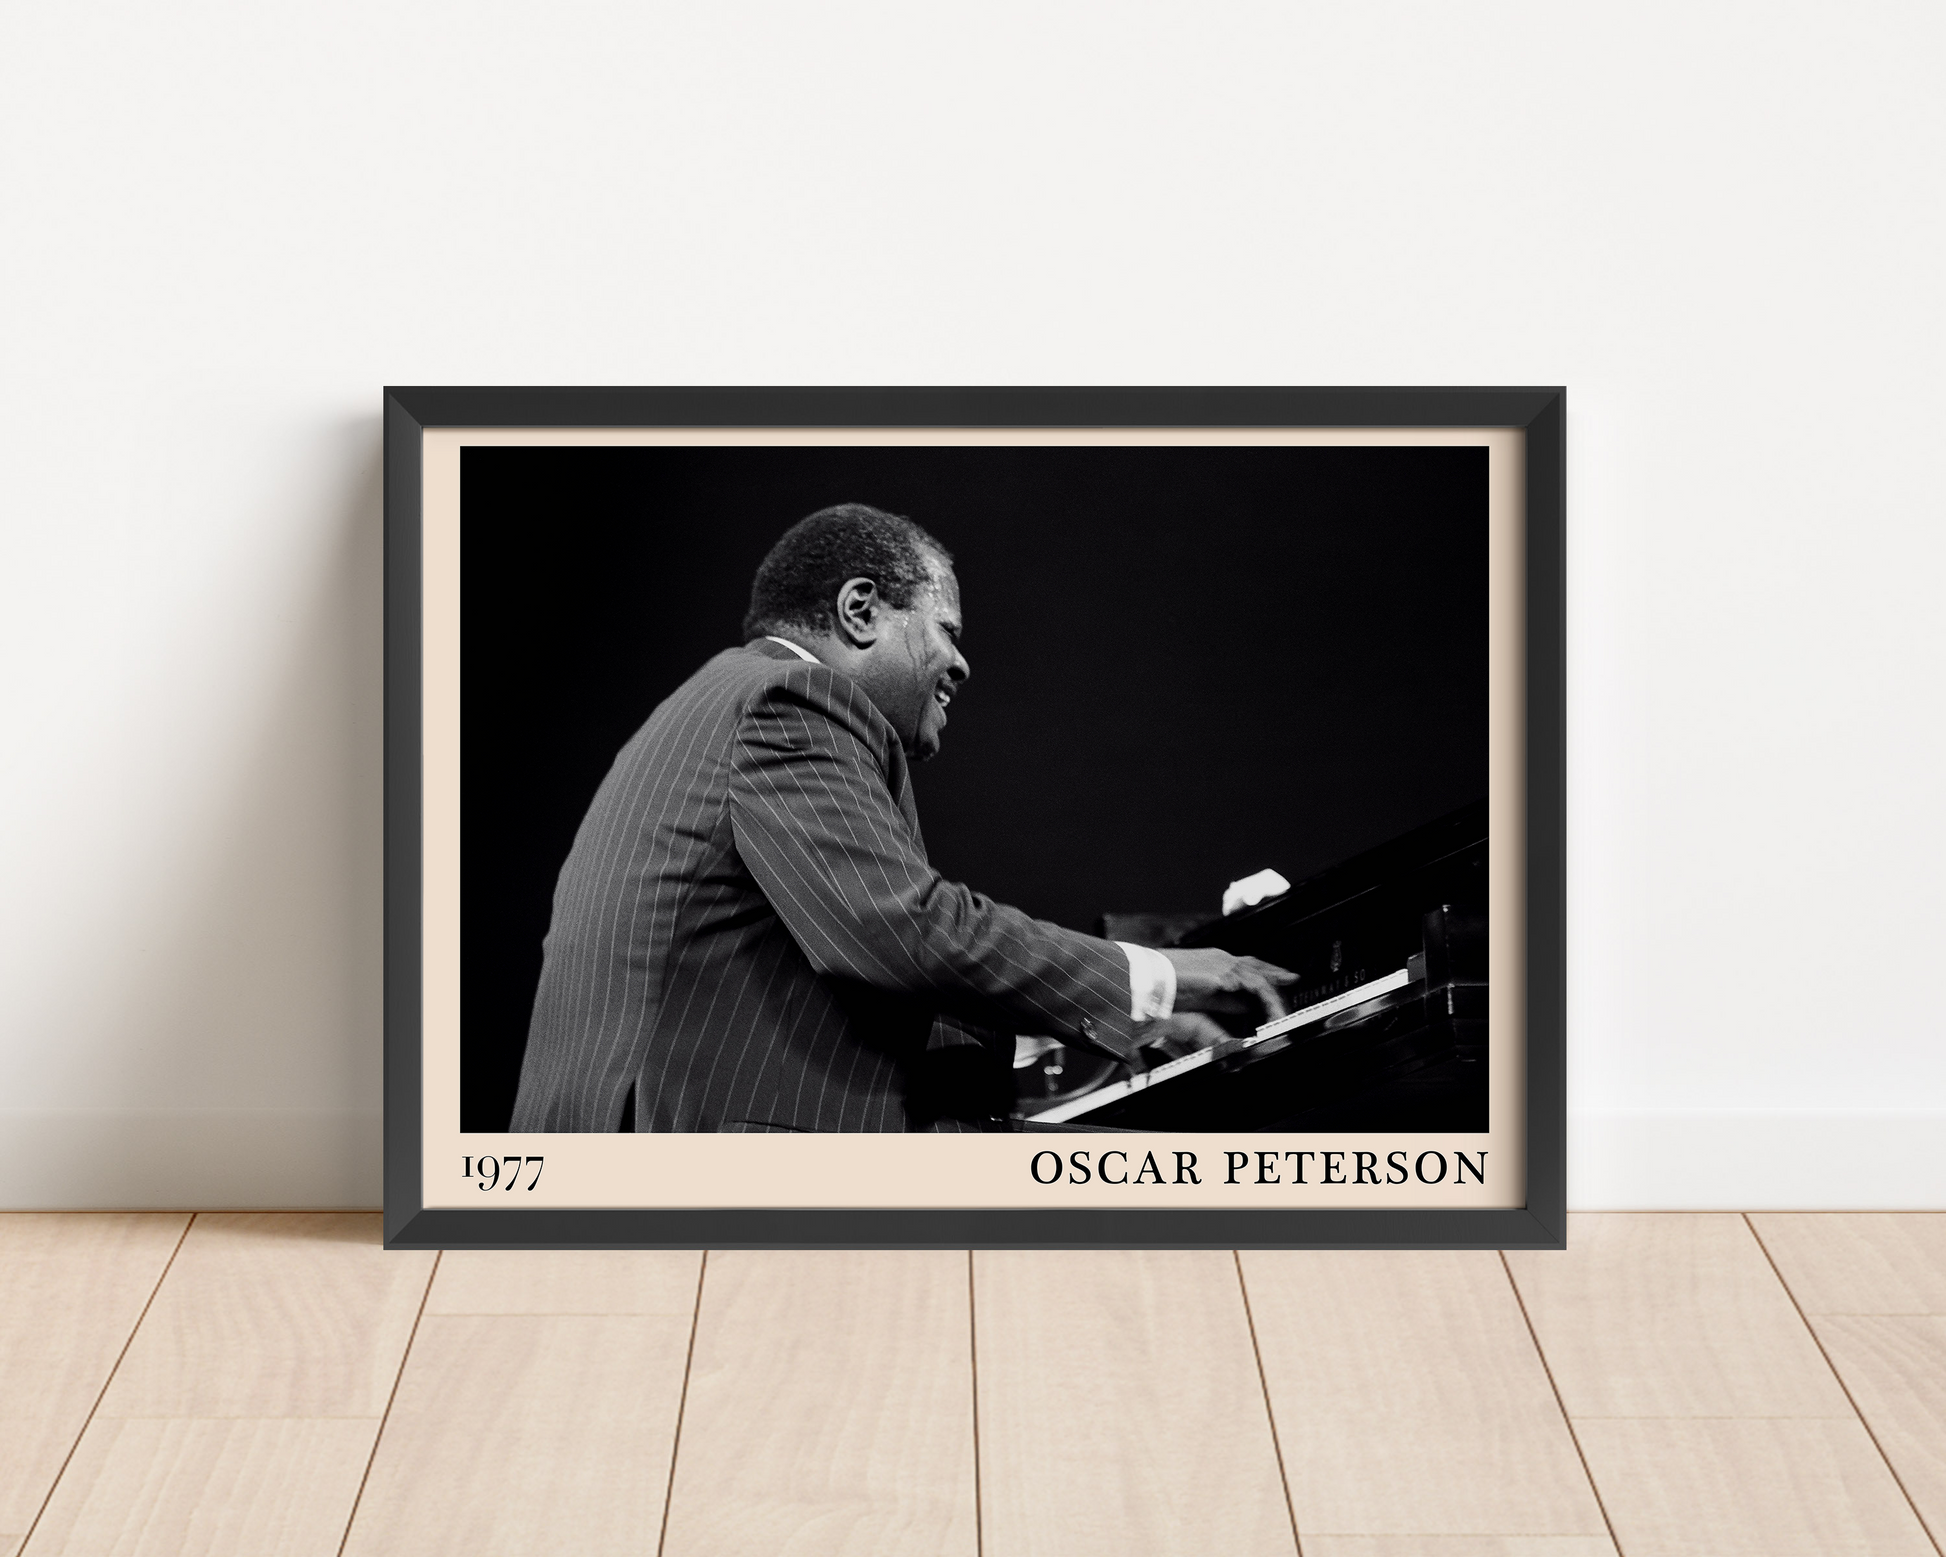 1977 photograph of Oscar Peterson taken by Thomas Marcello. Picture crafted into a black framed poster, with an off-white border. Poster is propped against a white wall